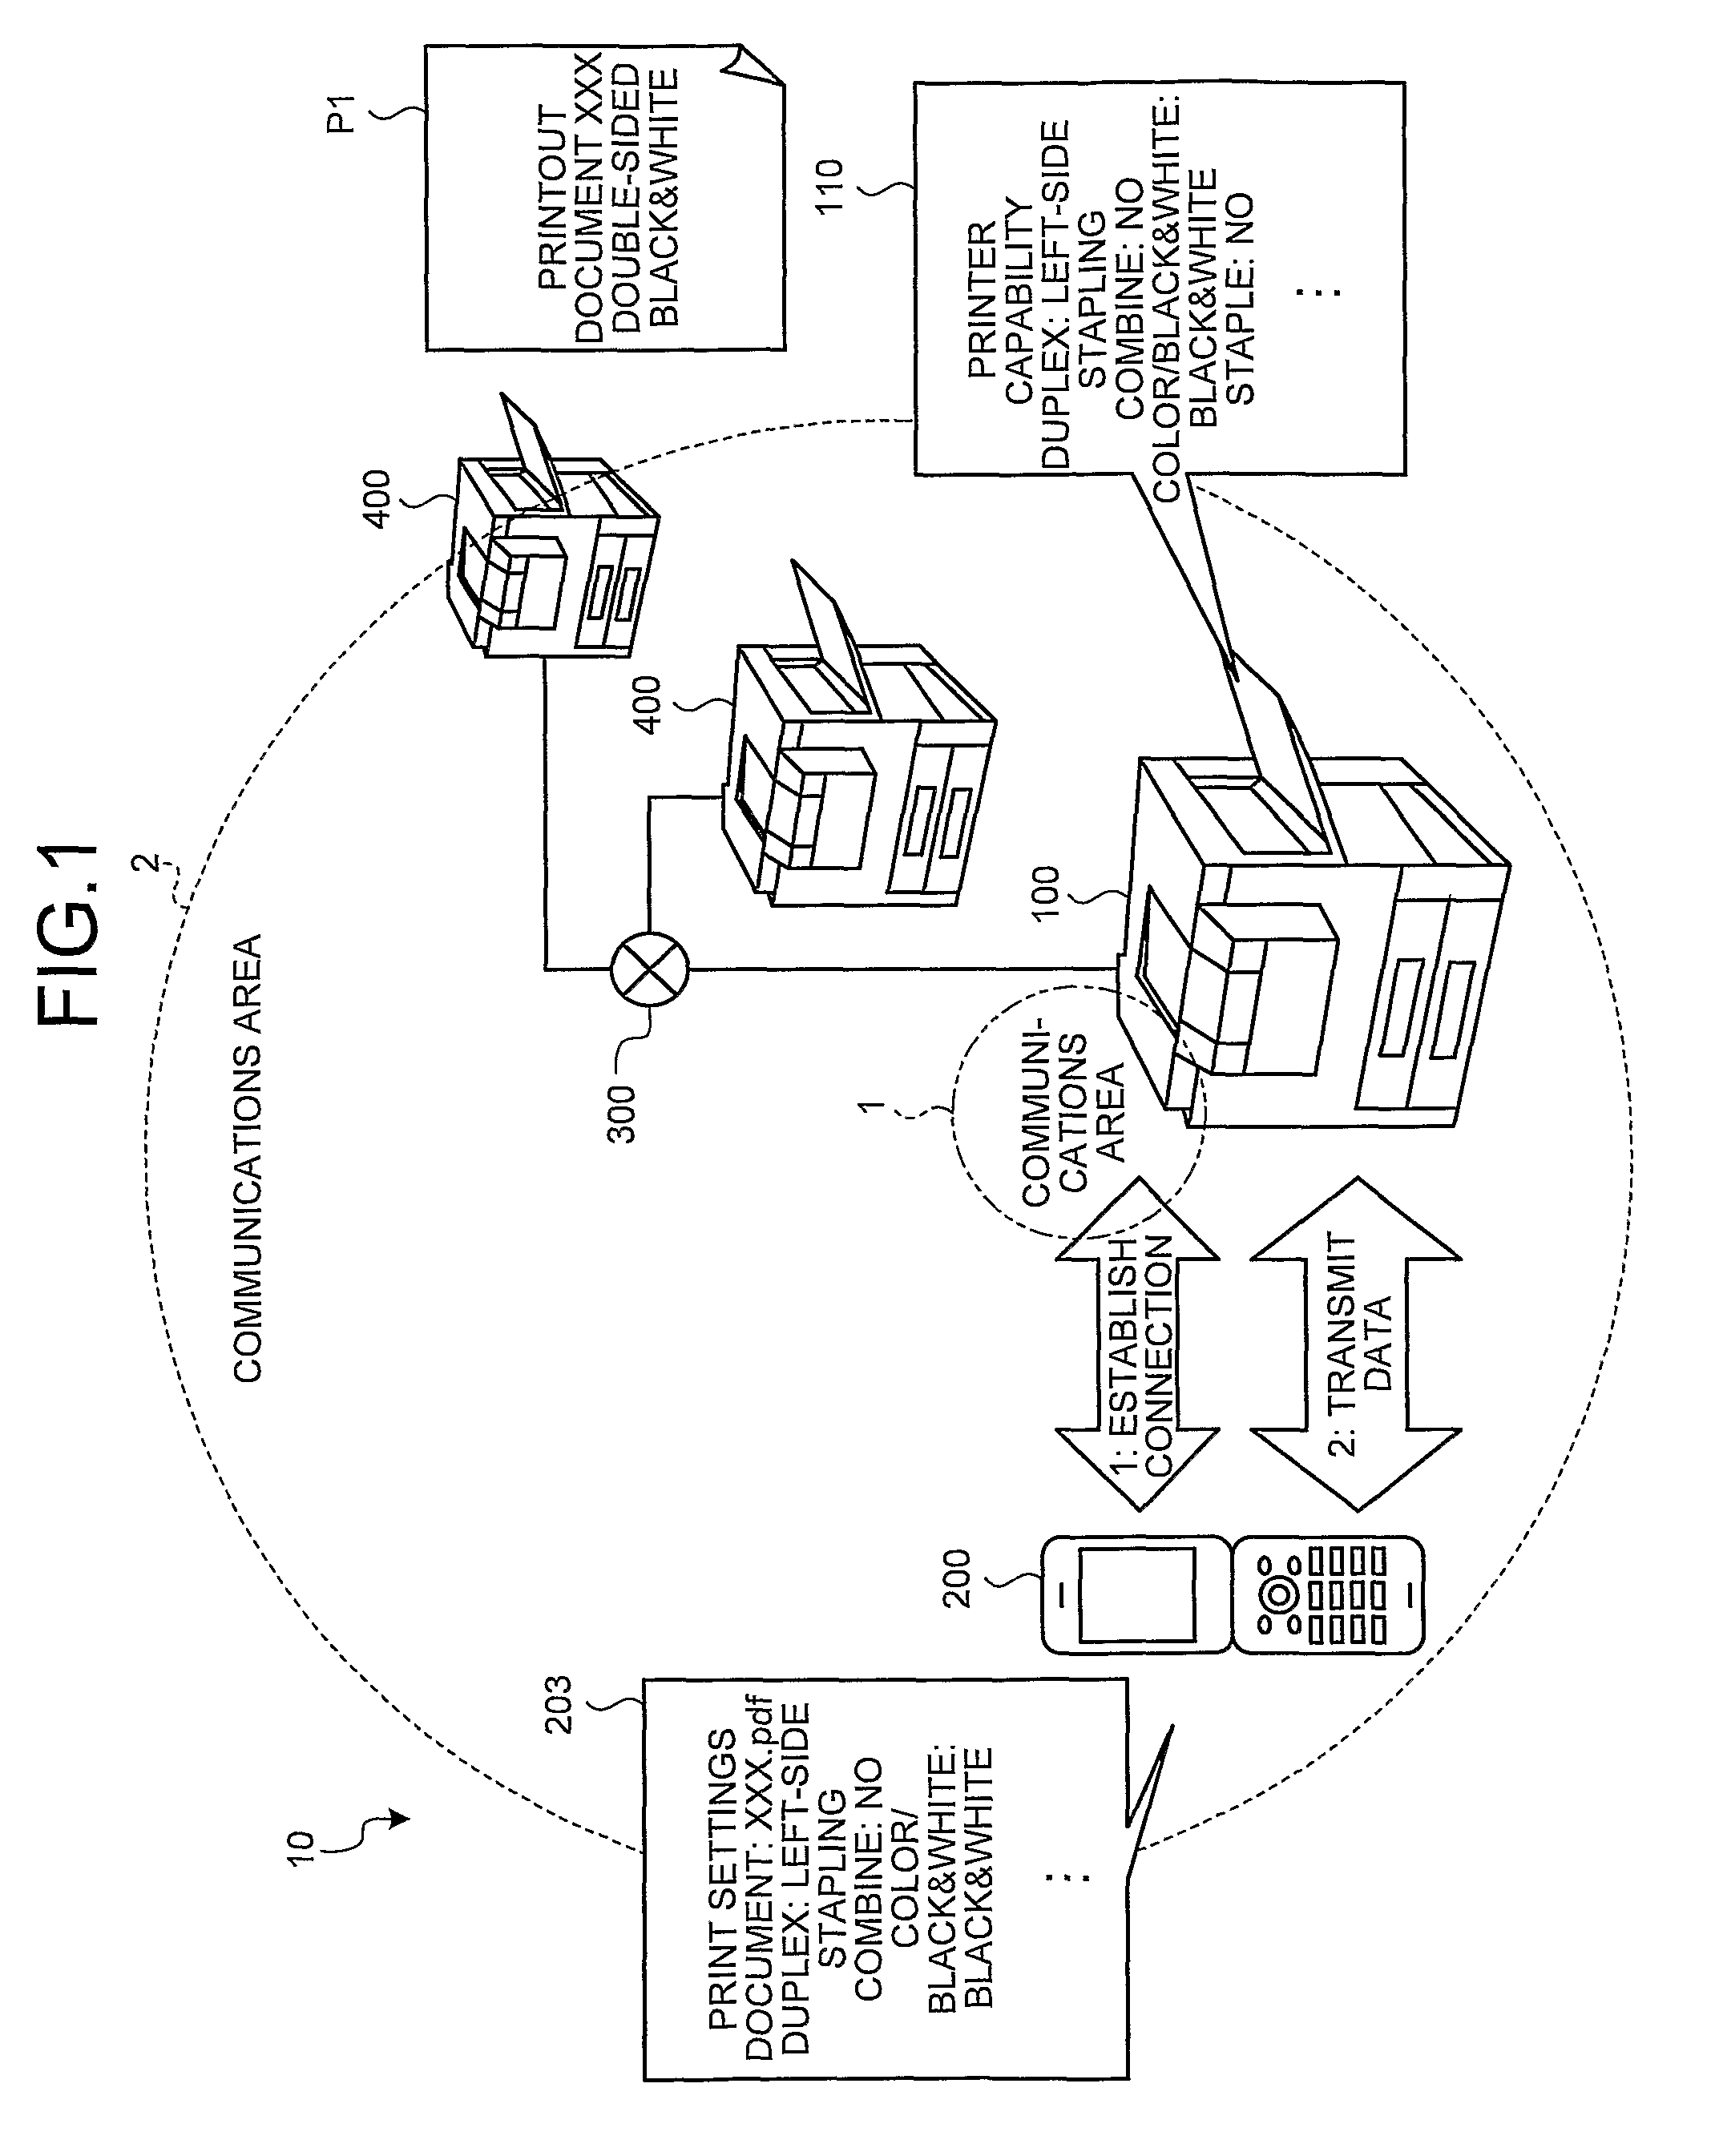 Image forming apparatus that communicates with a portable terminal device, and information processing system